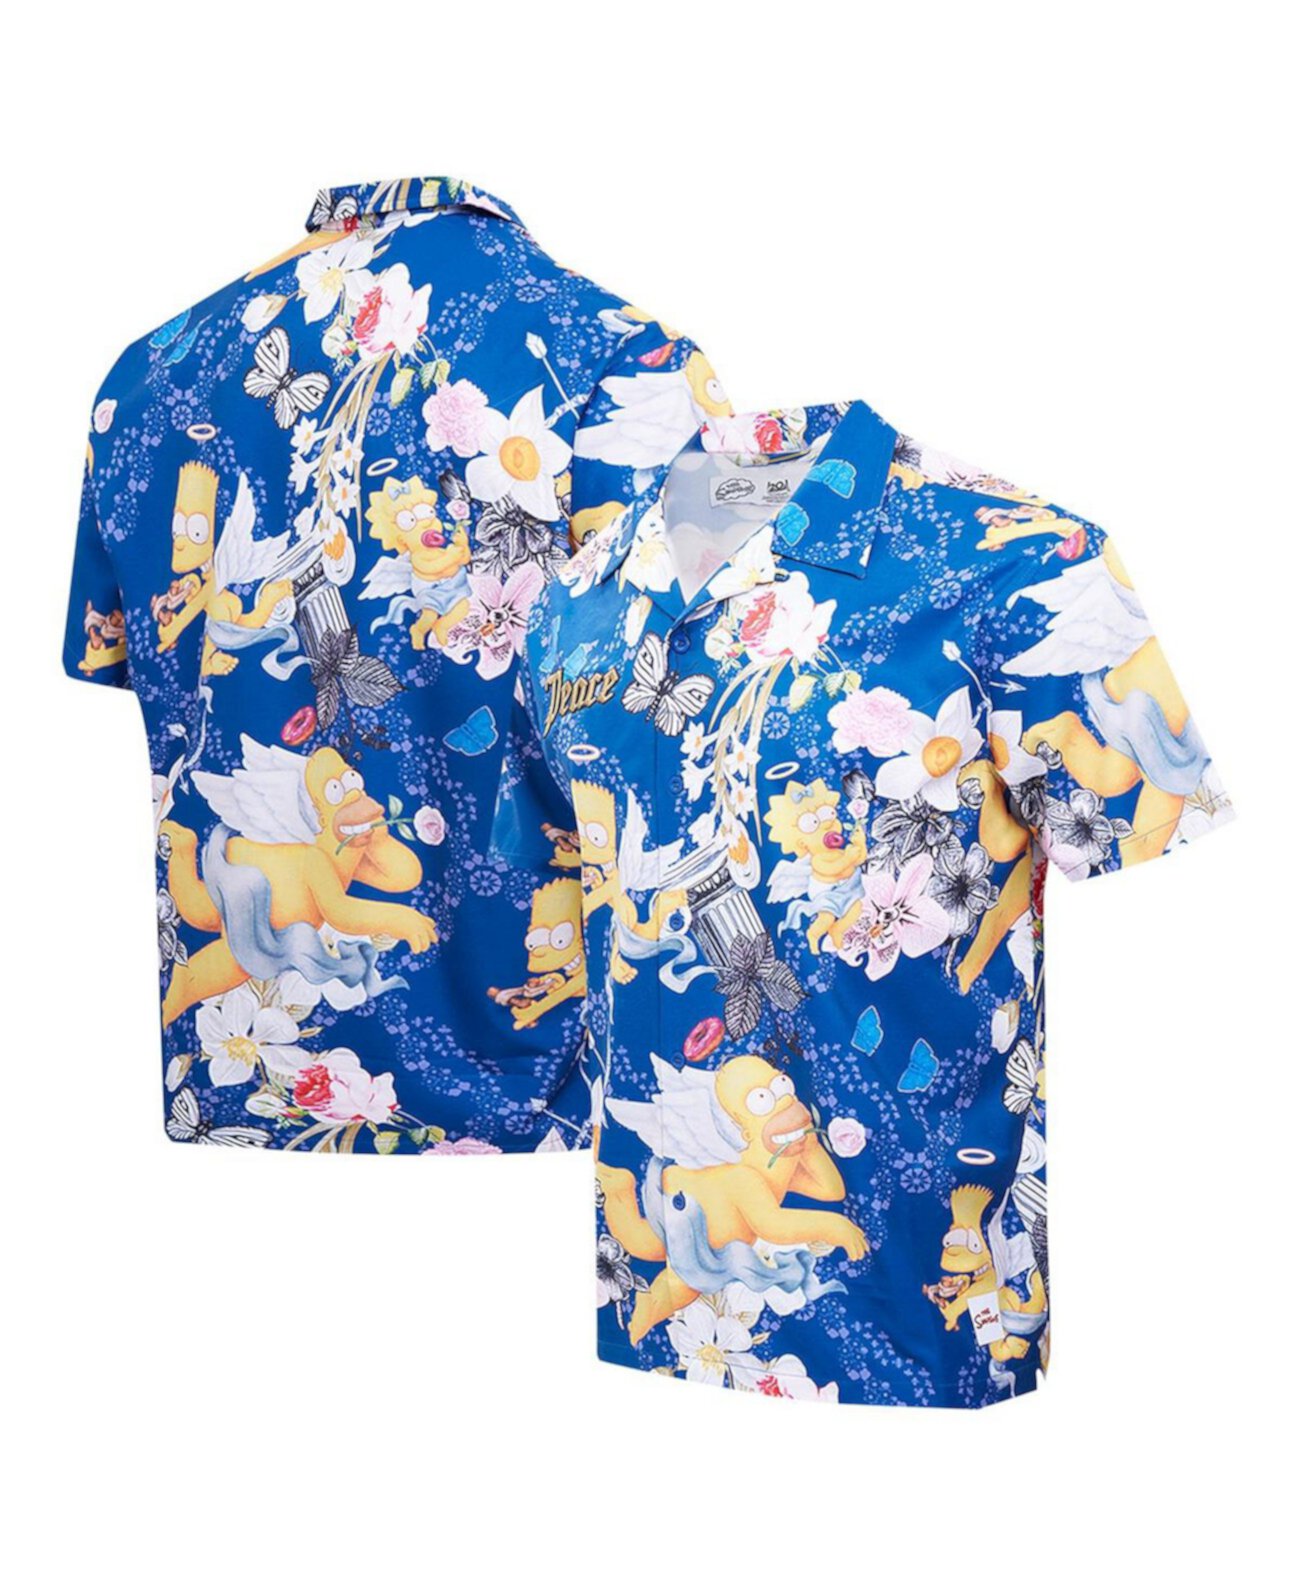 Men's Navy The Simpsons Peace Angels Button-Up Shirt Freeze Max